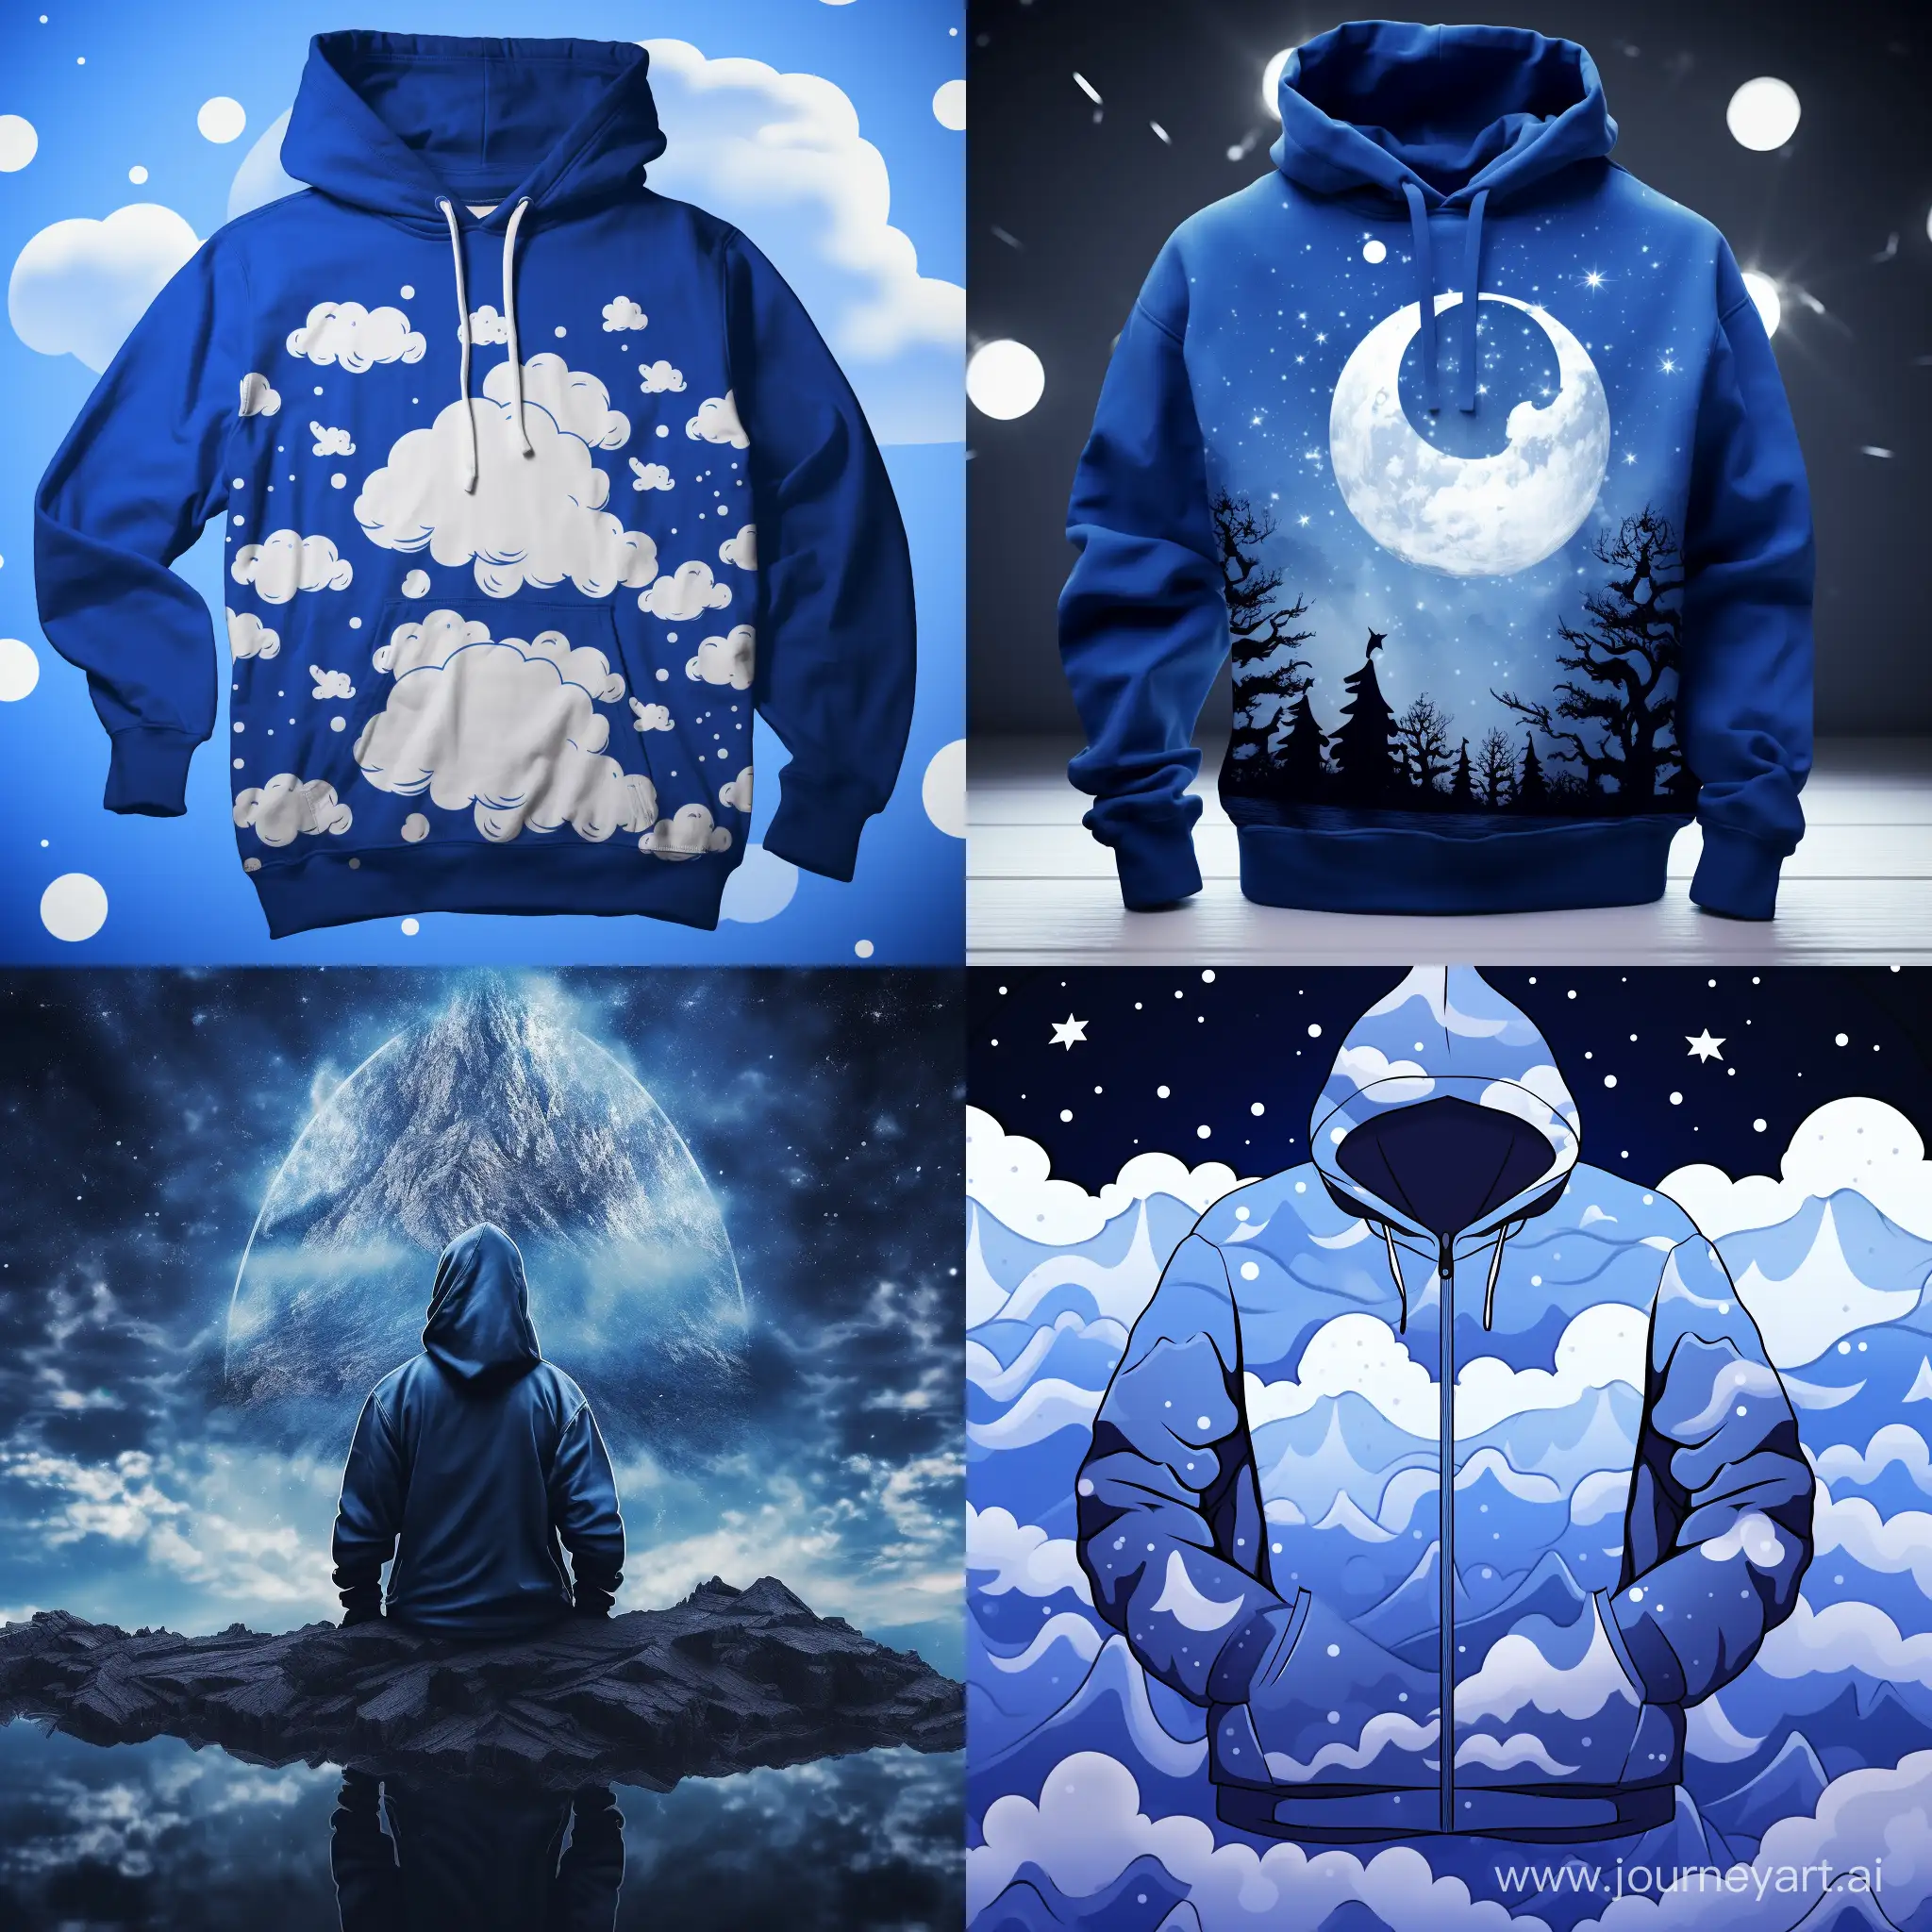 The cover for a YouTube channel selling hoodies, in blue and white colors, in the starry sky